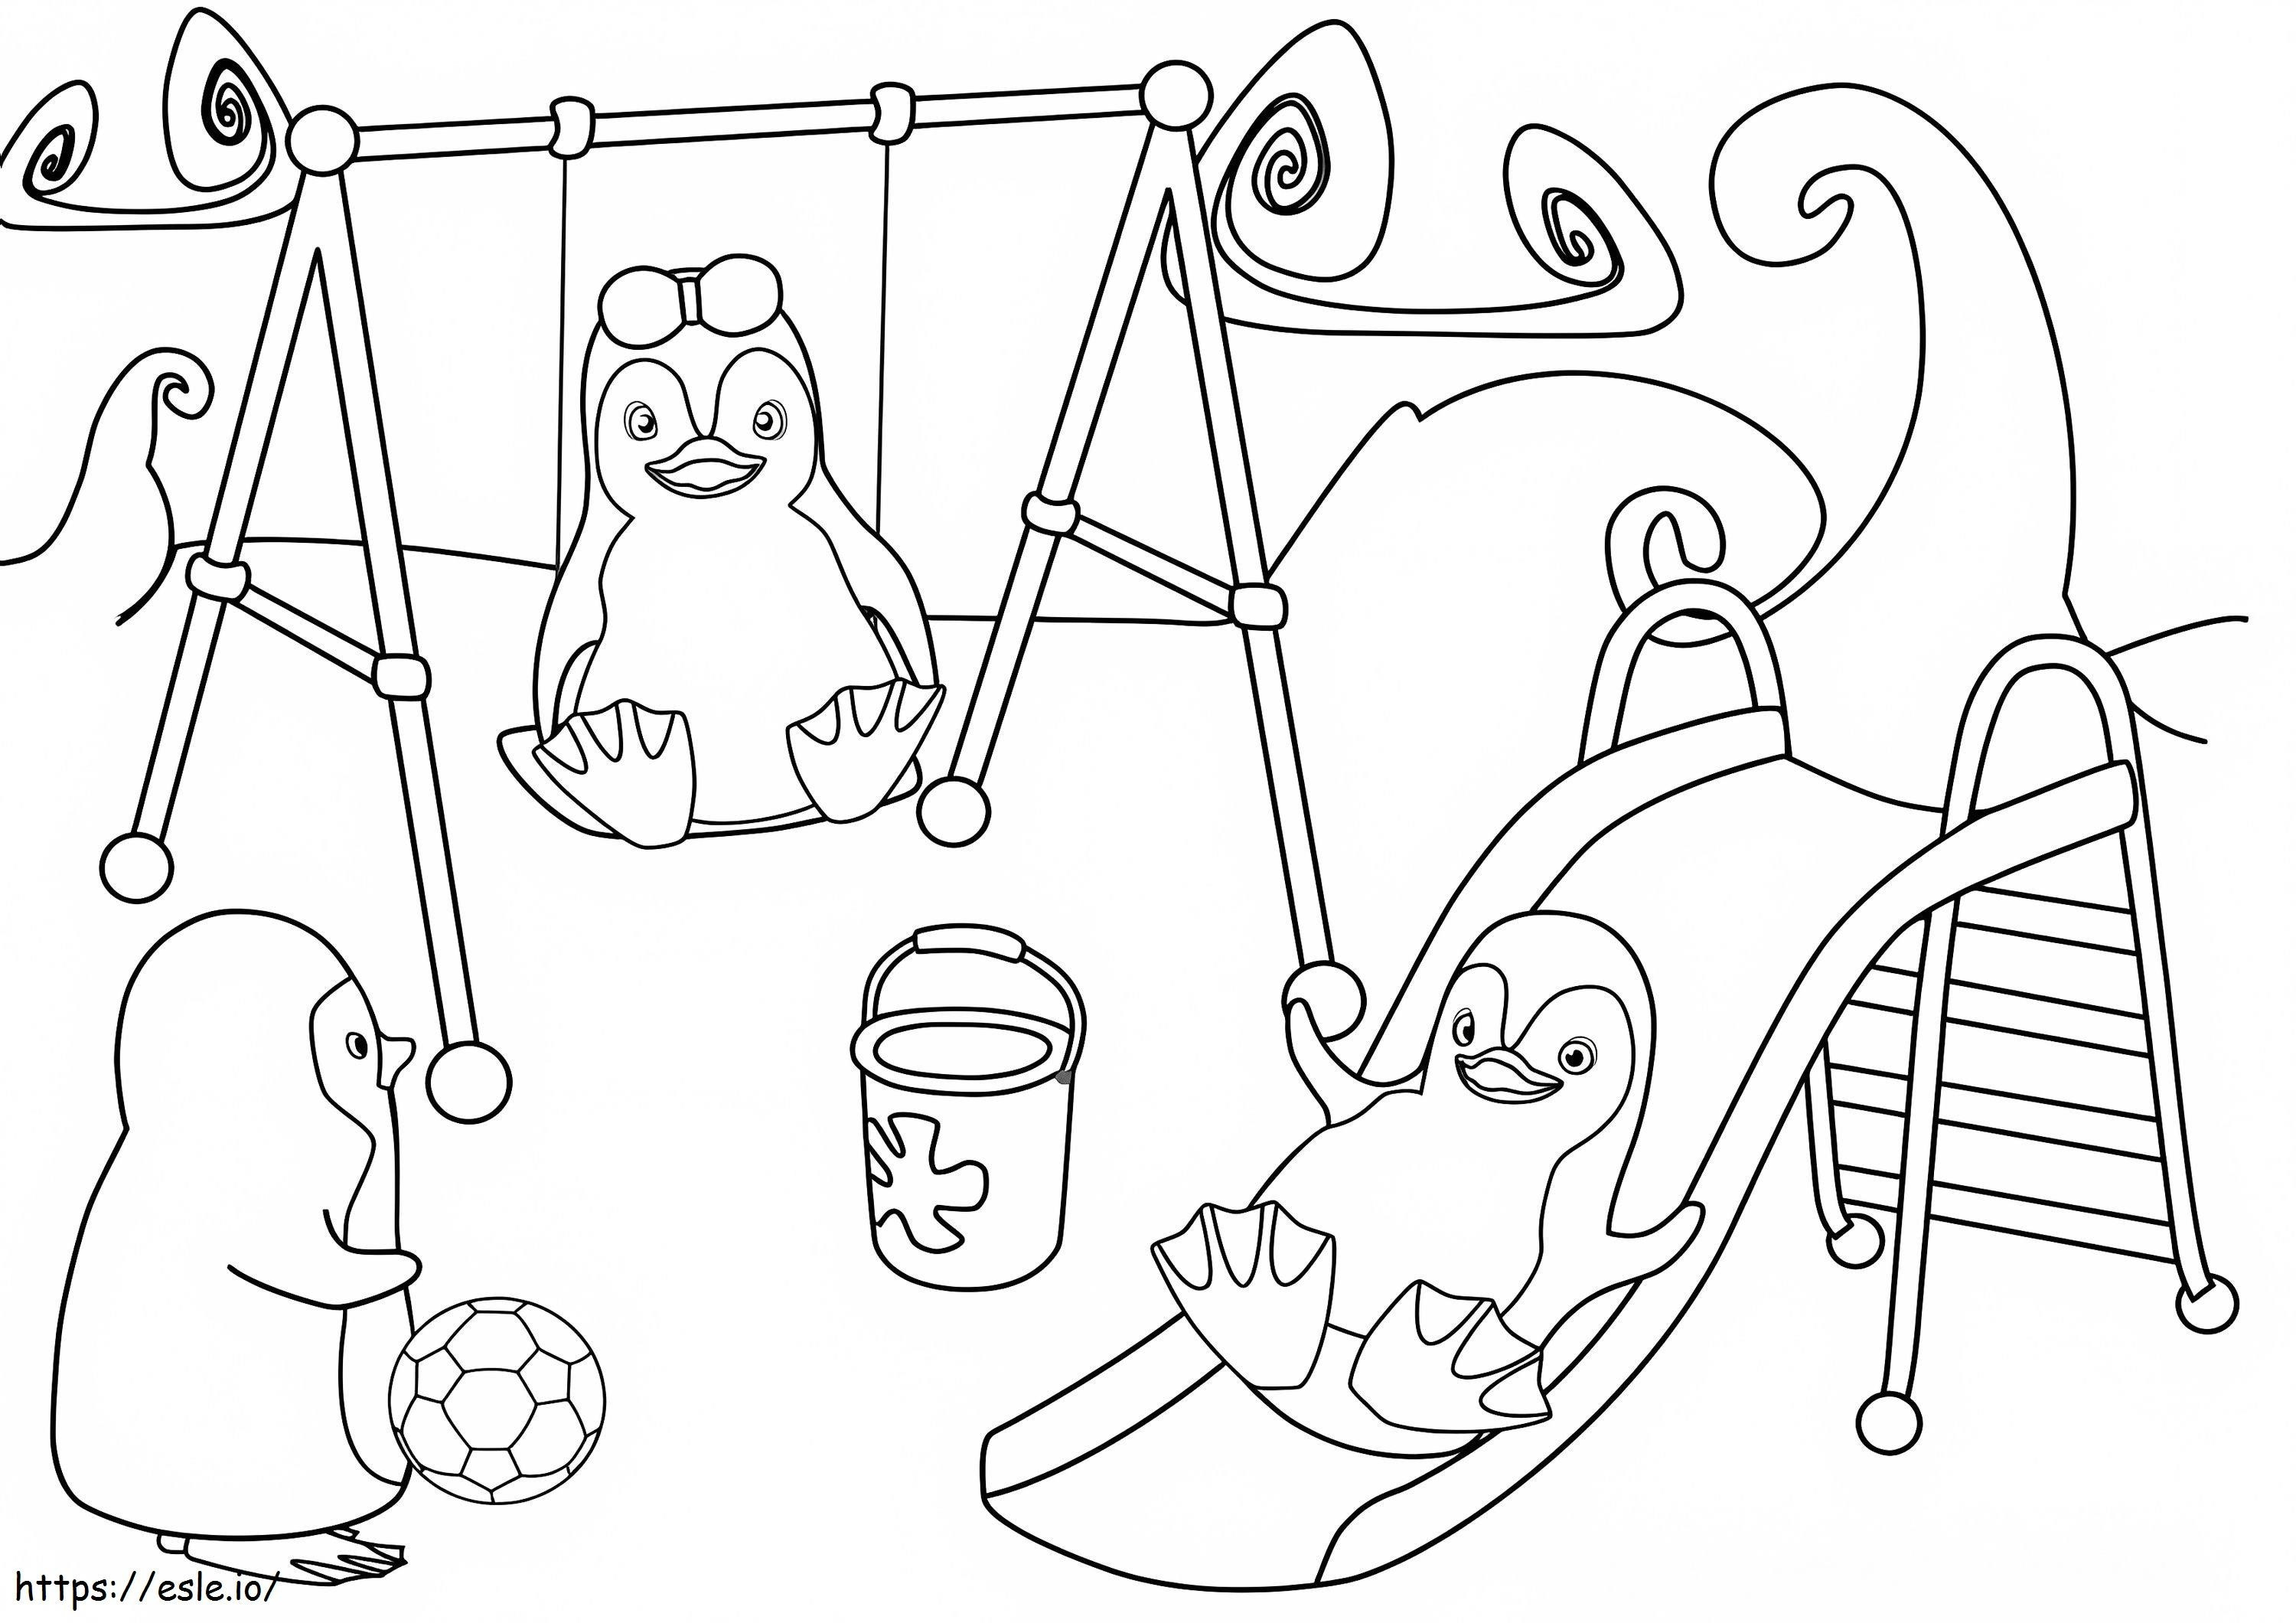 Happy Ozie Boo coloring page